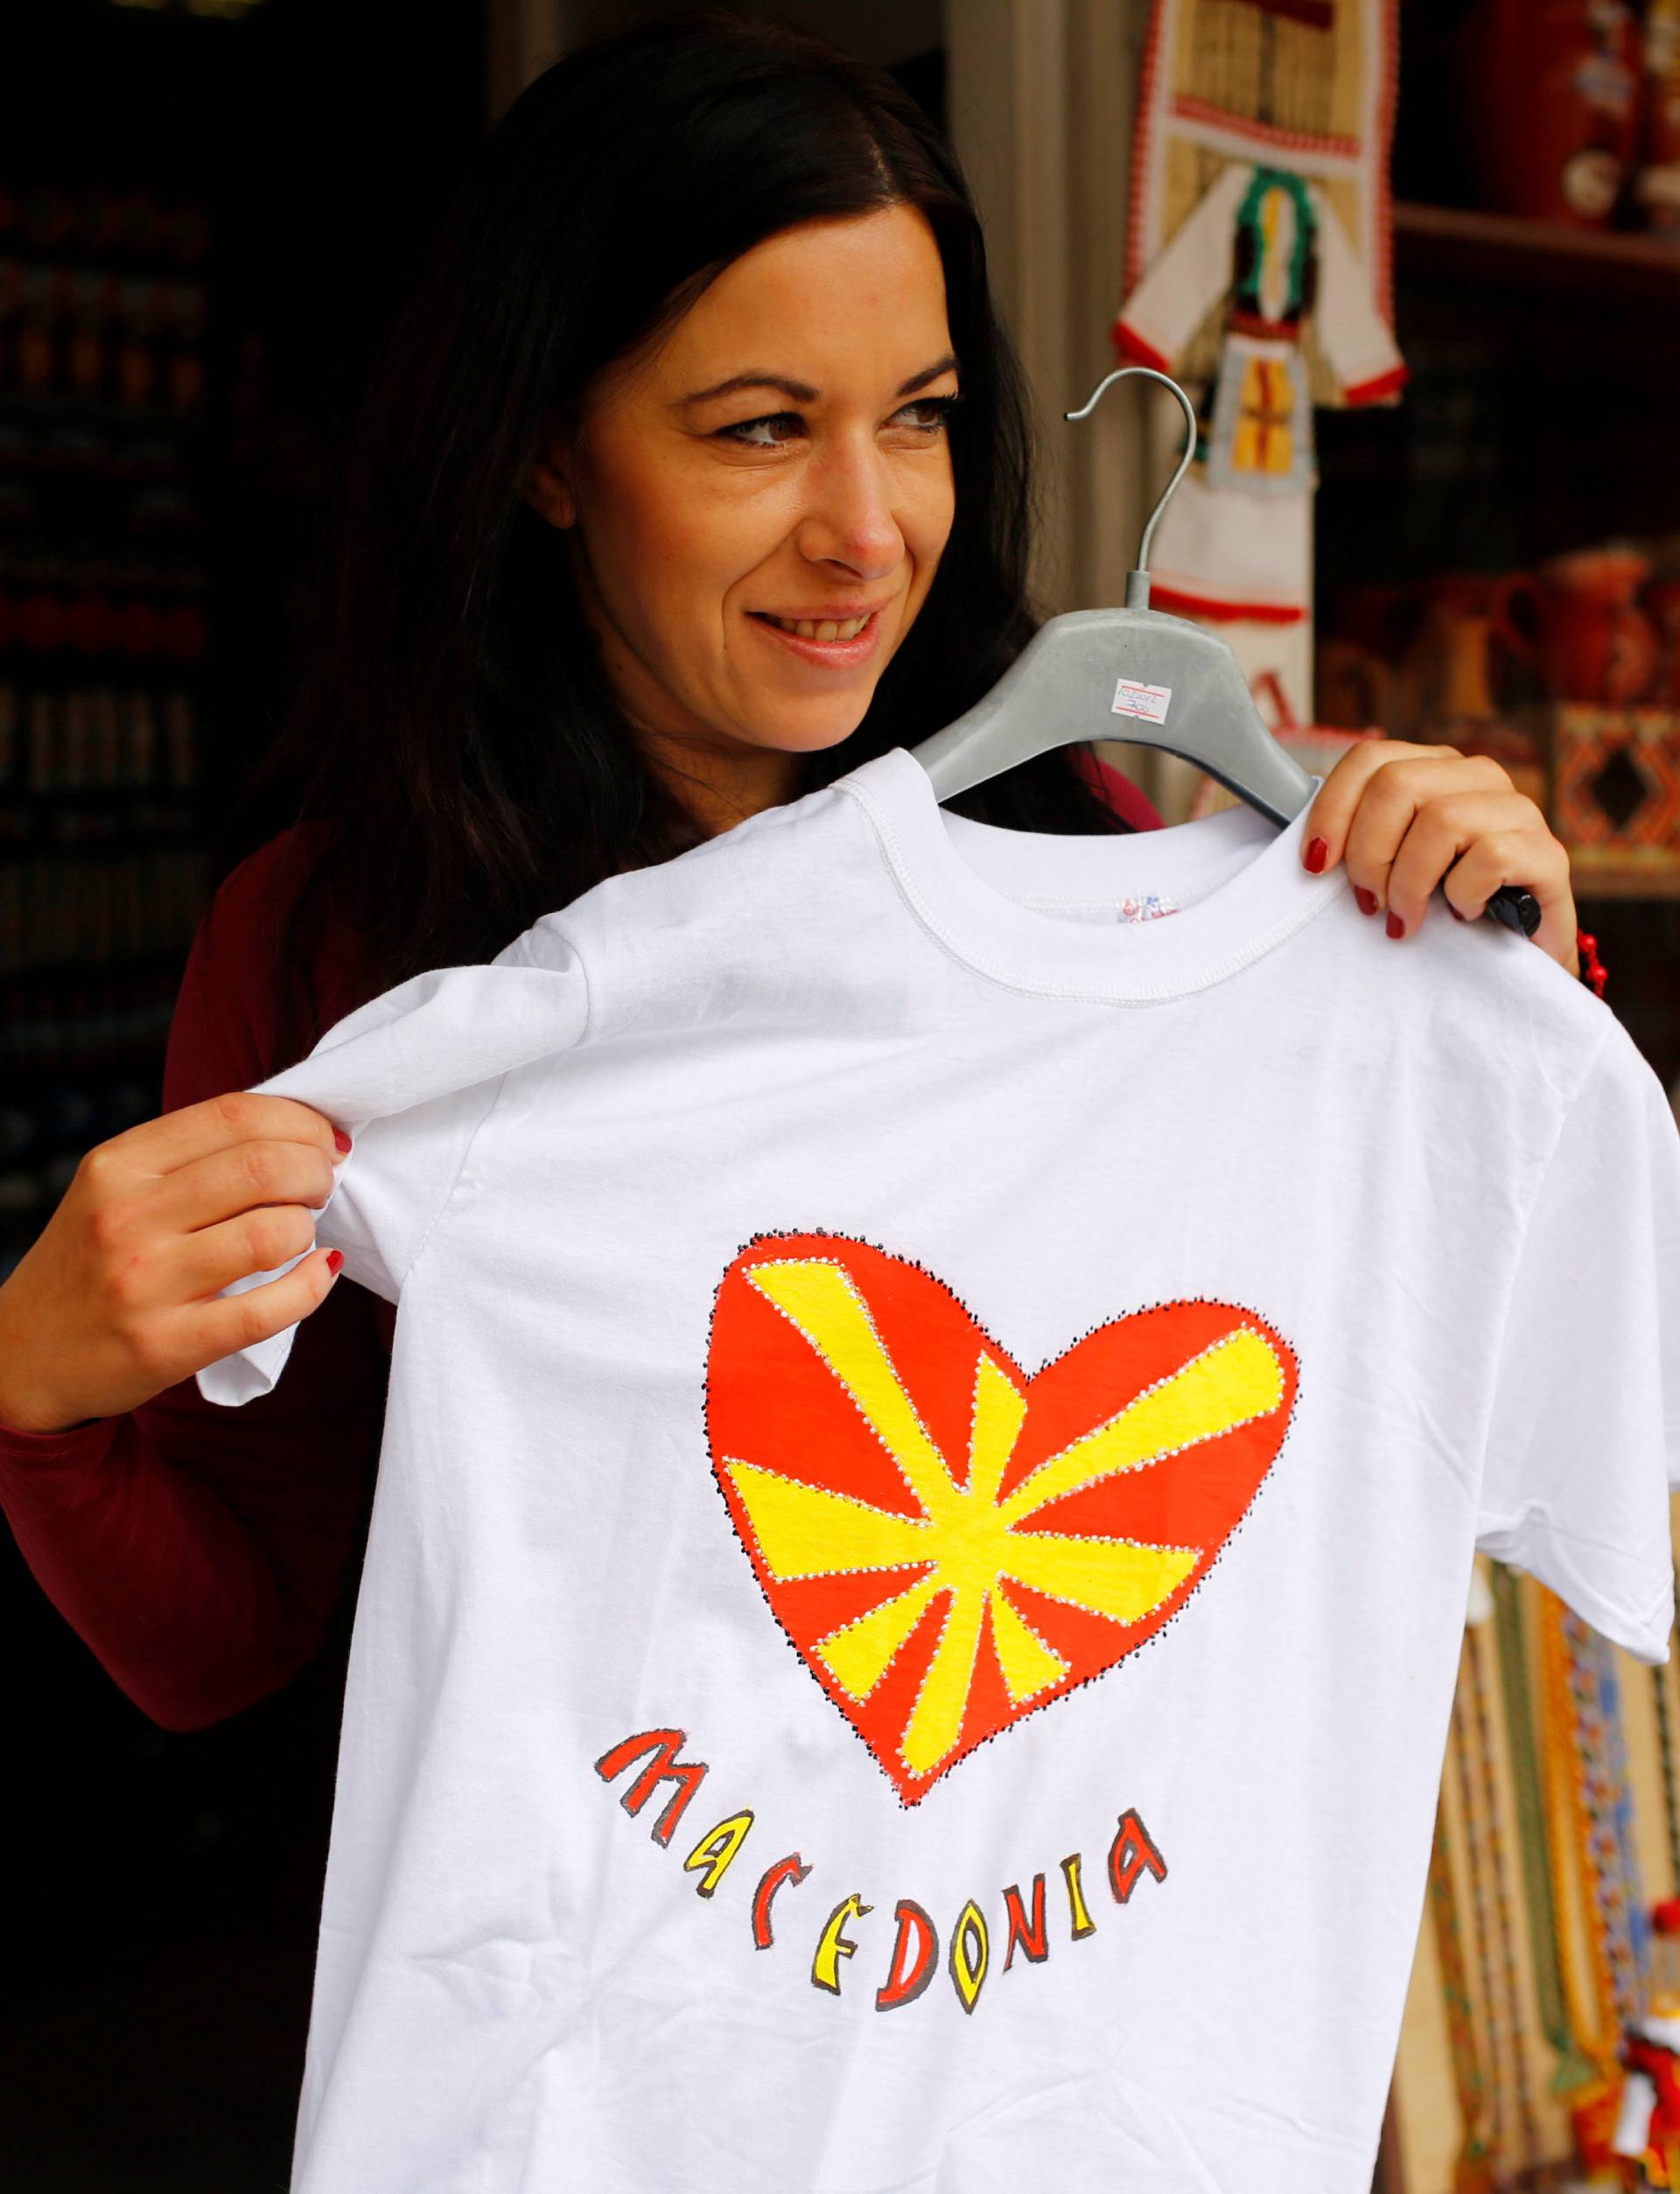 Tourists look at souvenirs with Macedonian flag on at the Old Bazar in Skopje